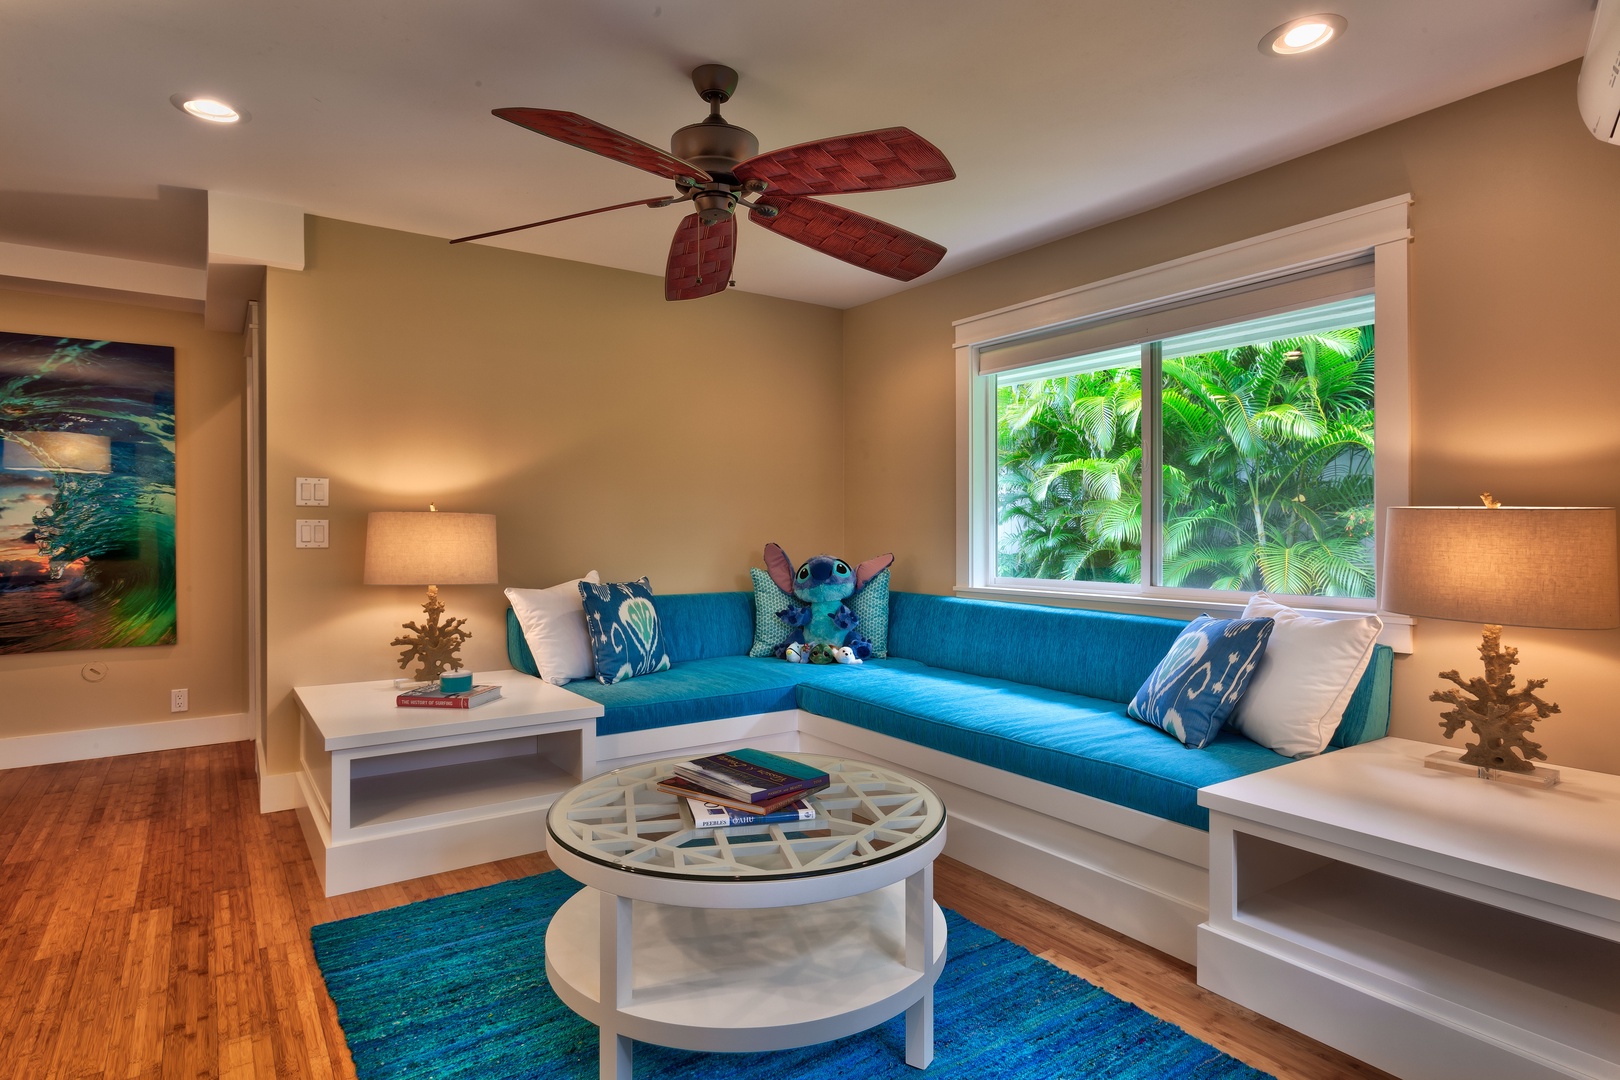 Kailua Vacation Rentals, Maluhia - The lush, tropical surroundings of Maluhia’s pool (just outside the window) and waterfall give guests the sense of having stumbled upon a hidden lagoon